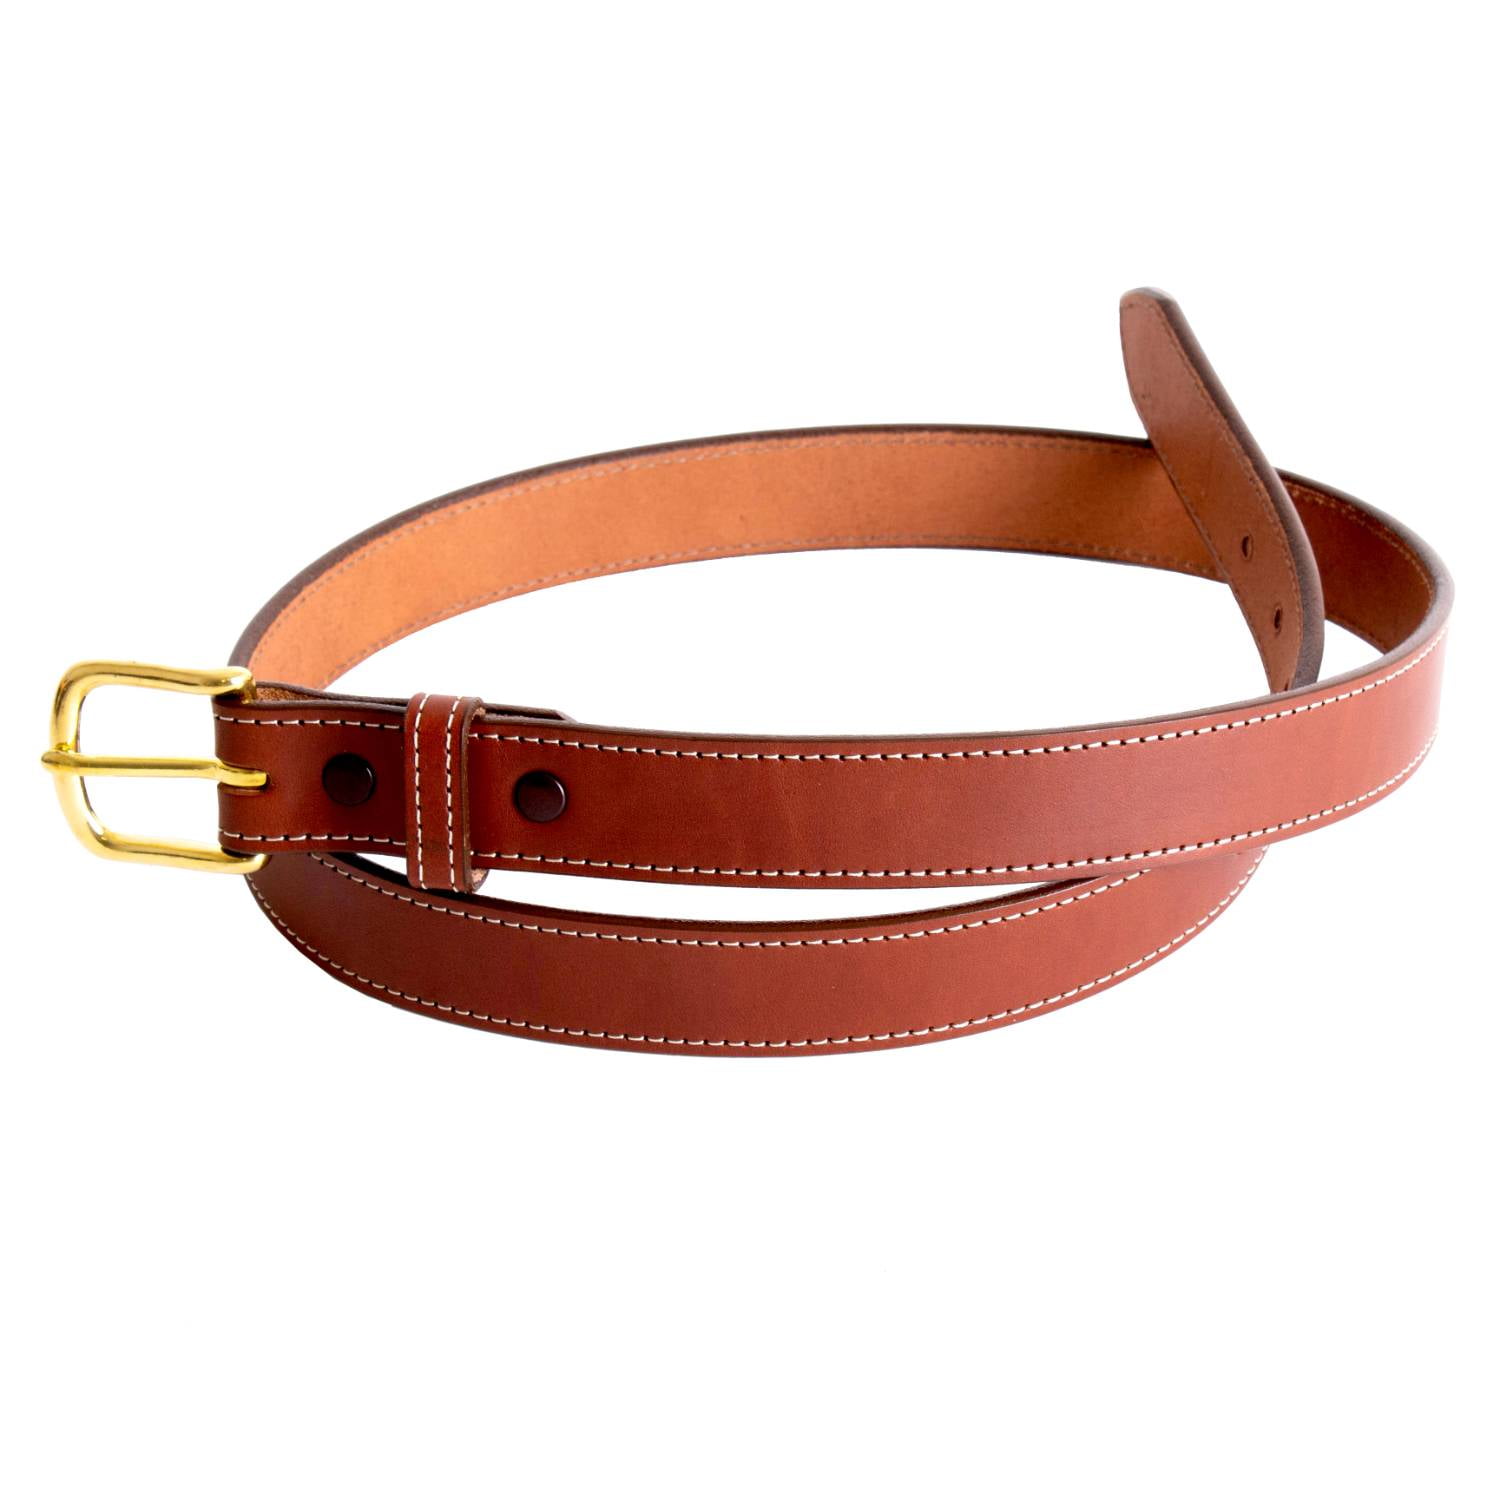 Amish-Made Leather Dress Belt for Business or Everyday Wear, Goldtone  Buckle, 1 Inch Wide, Brown, 36